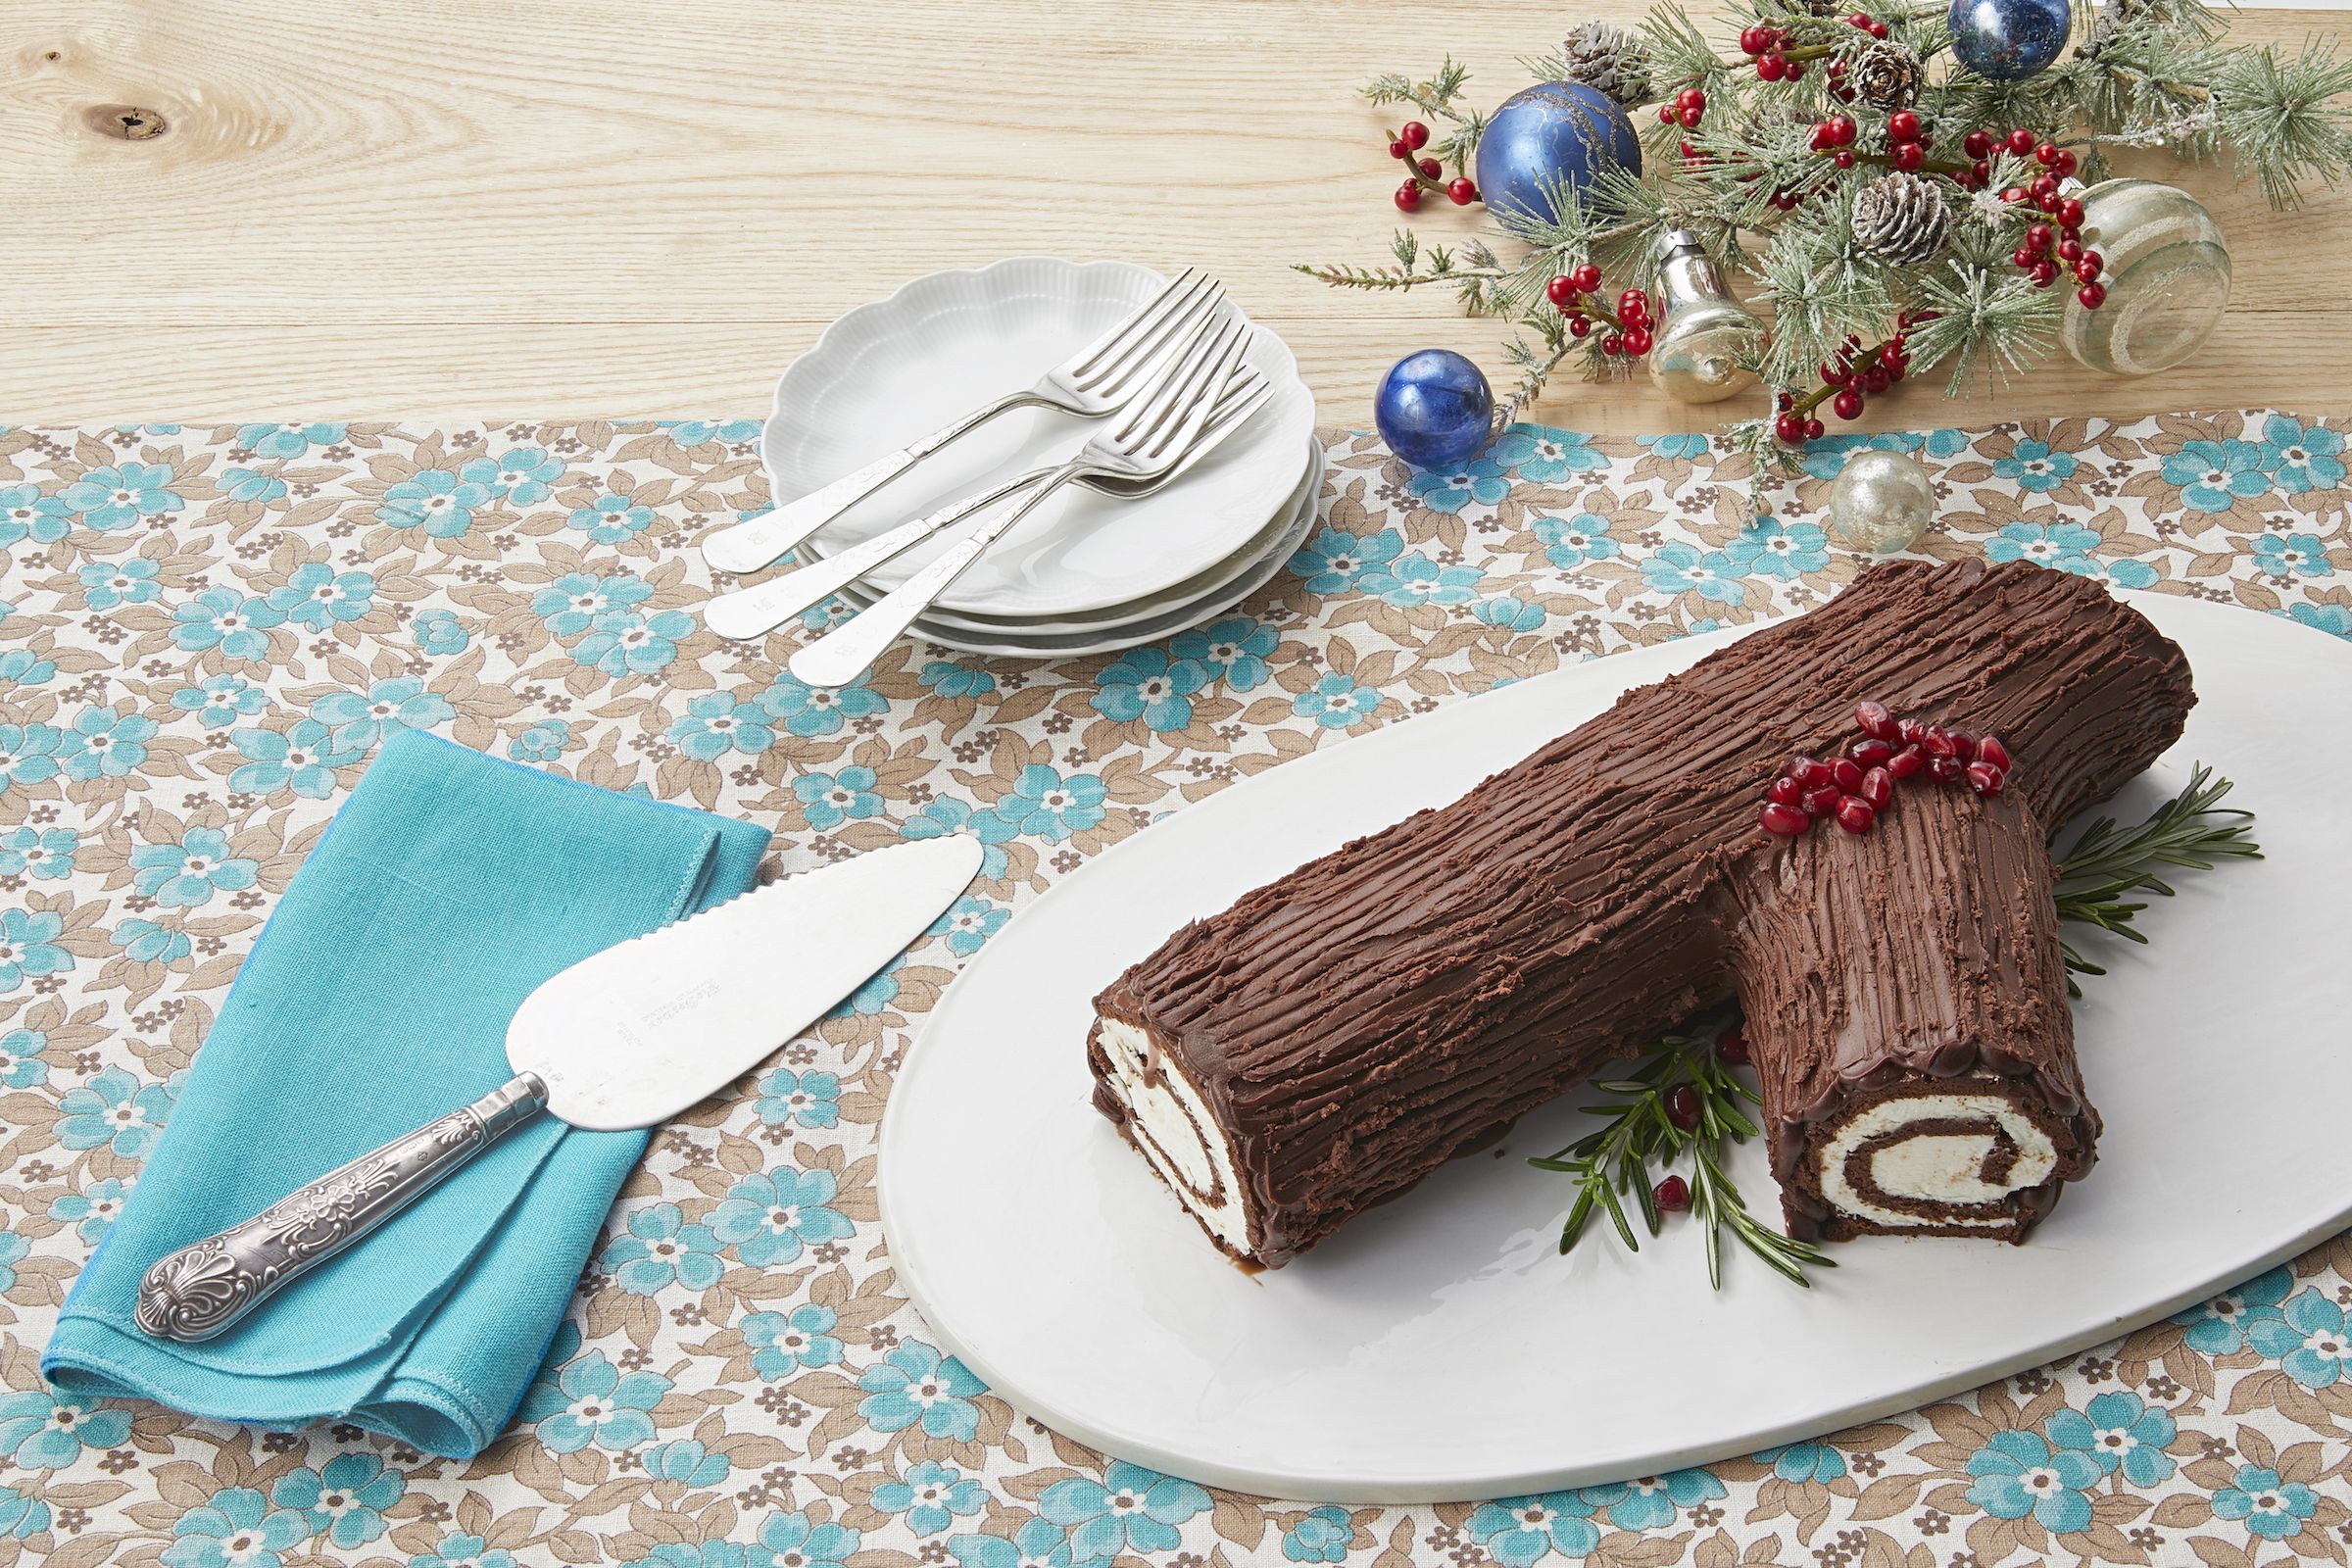 Amazon.co.jp: (12/22-12/25 Delivery) Christmas Cake Roll Chocolate Roll  Chocolate 6.3 inches (16 cm) Estimate: 4 people, 5 people, 6 people, Christmas  cake orders, chocolate cake, chocolate, decoration, character, cute,  fashionable : Food, Beverages ...